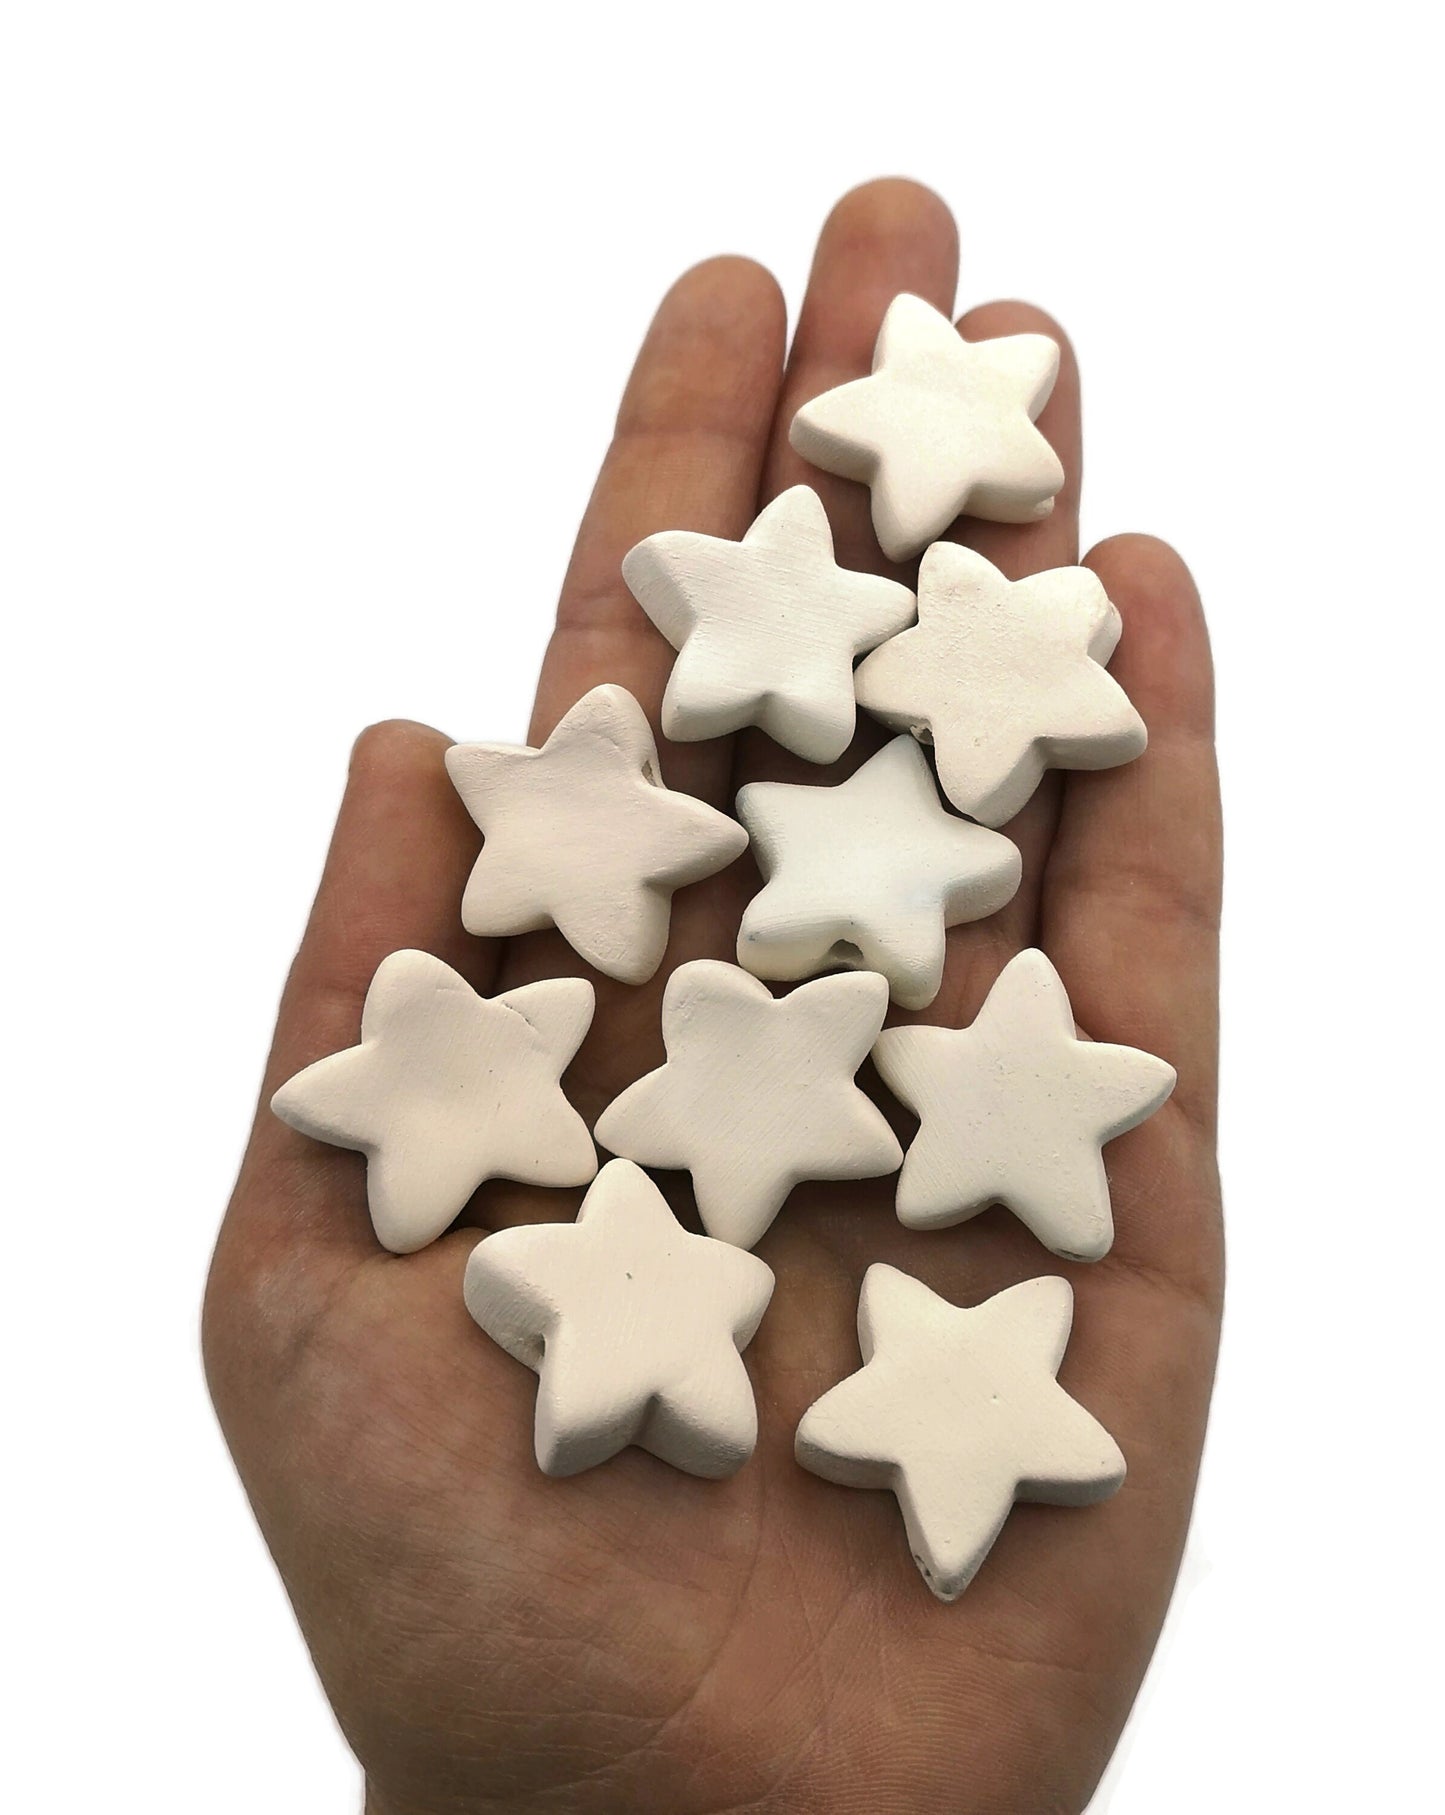 Handmade ceramic bisque beads set for jewelry making, Unfinished Star Beads blank ready to paint - Ceramica Ana Rafael